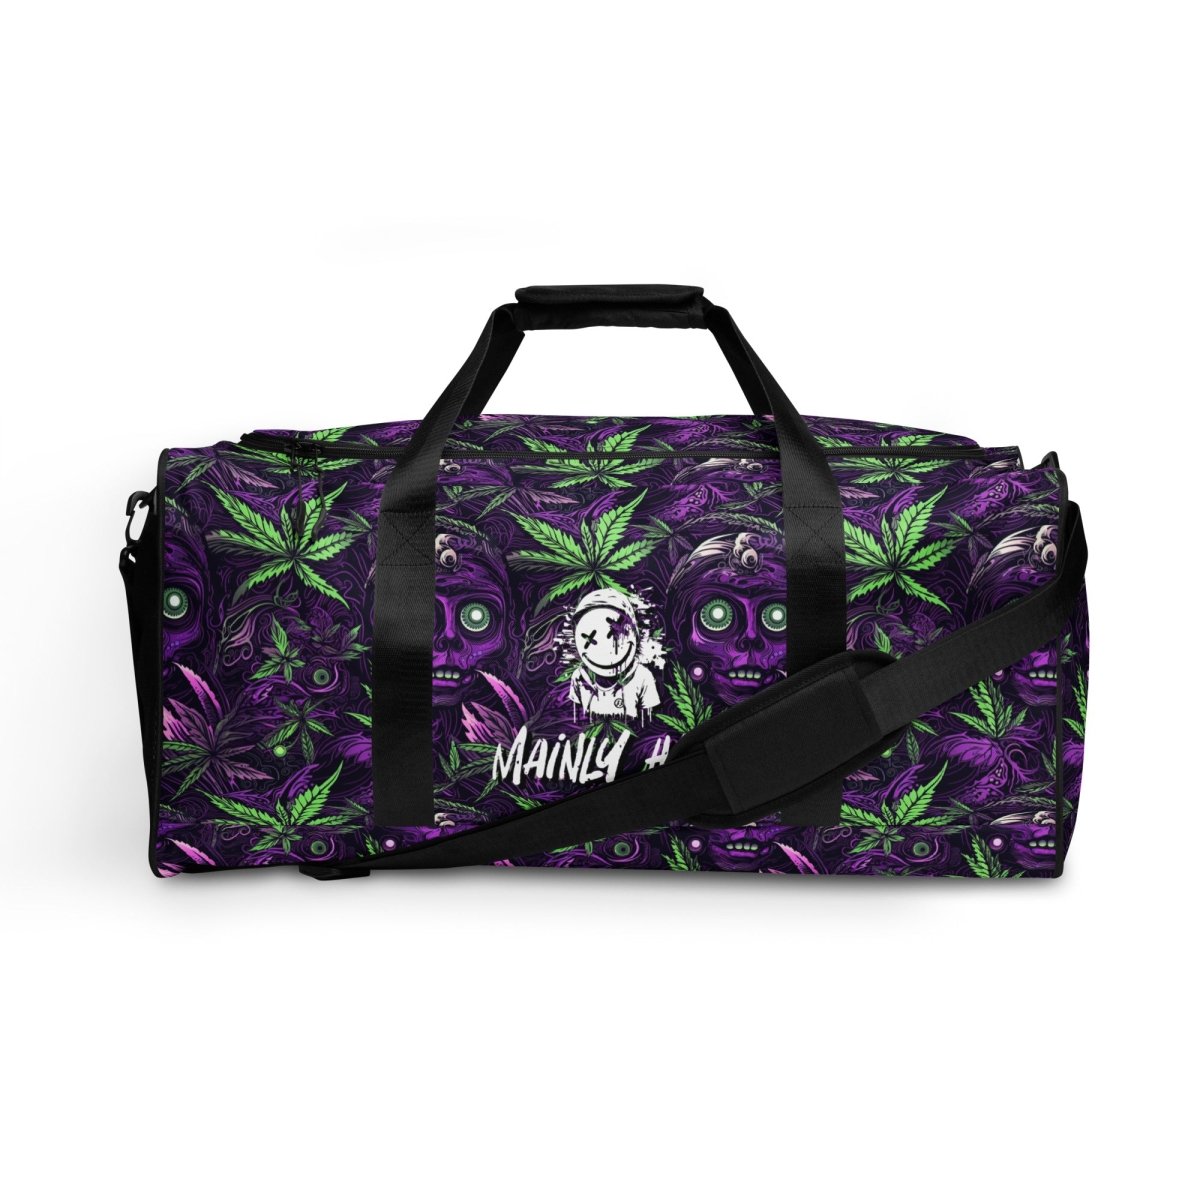 Leaves & Creature Duffle bag - Mainly High